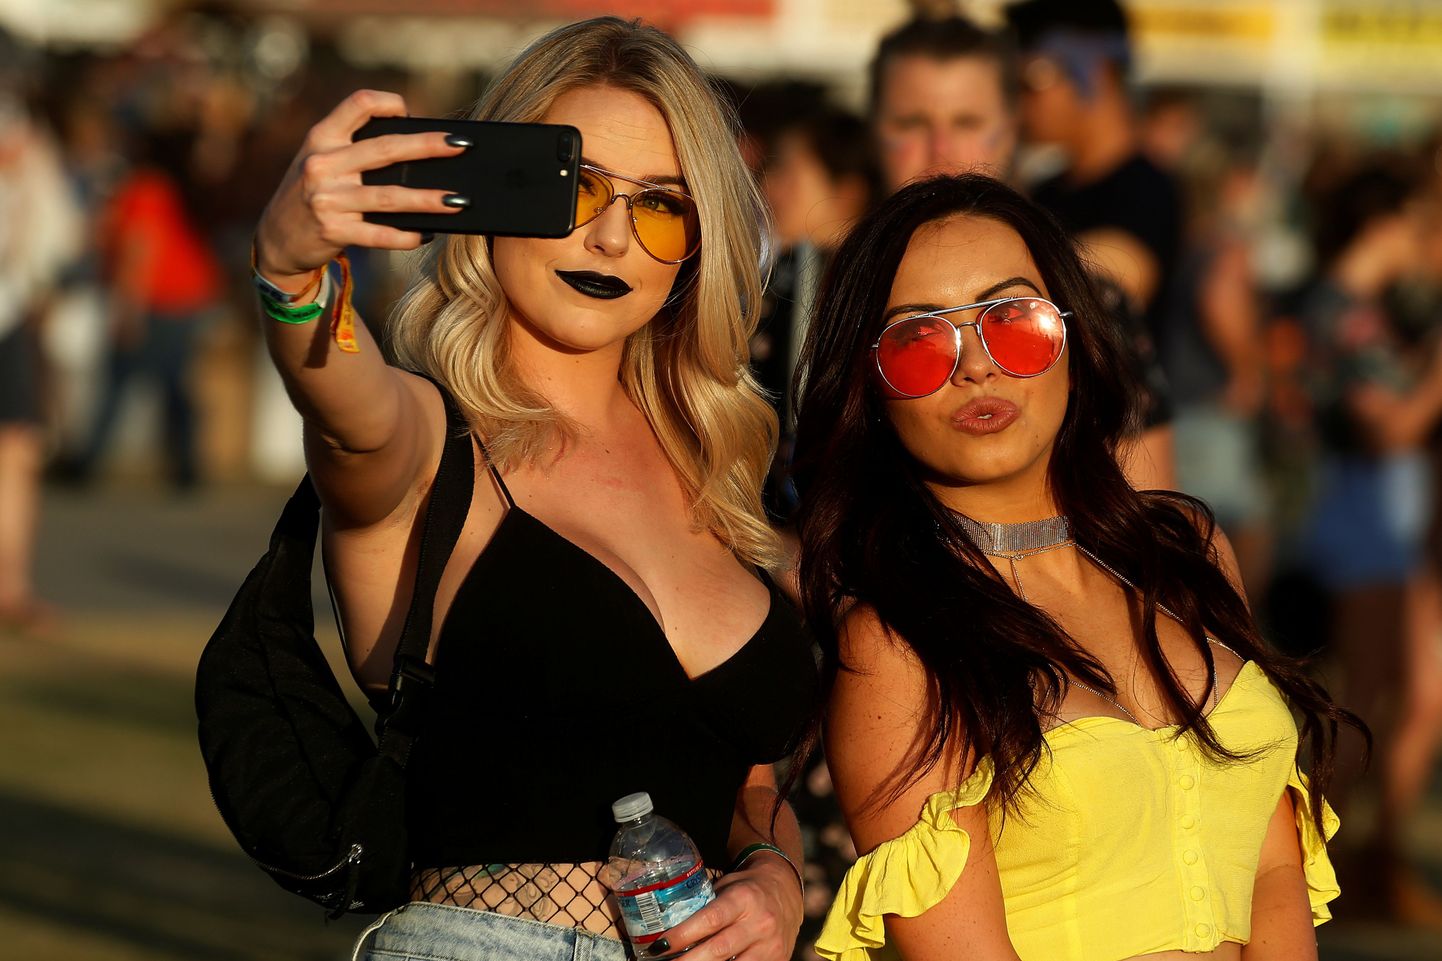 Women take a photo in the late afternoon sun during the Coachella Valley Music and Arts Festival in Indio, California, U.S. April 16, 2017.   REUTERS/Carlo Allegri